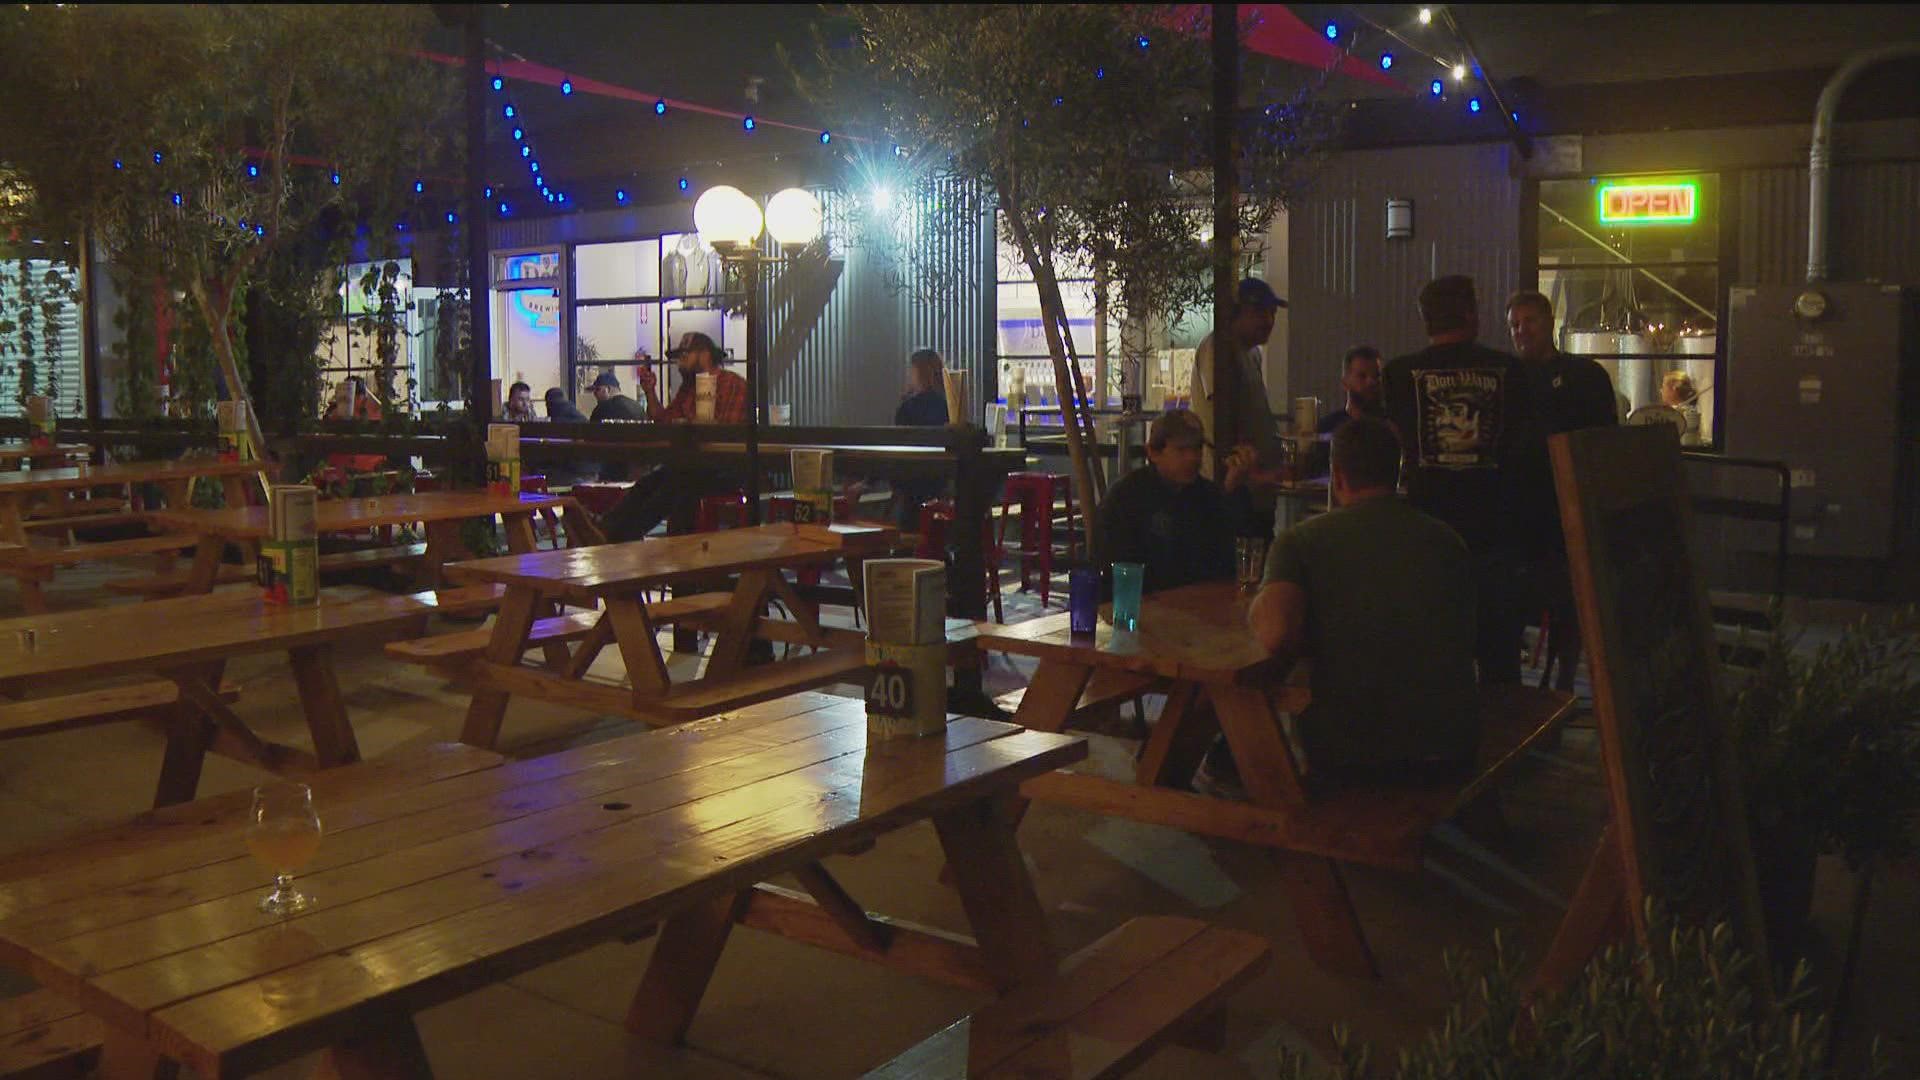 The Gärten is located in the South end of Bay Park on Banks St. It is a collective of businesses offering San Diego food and drink in a garden setting.